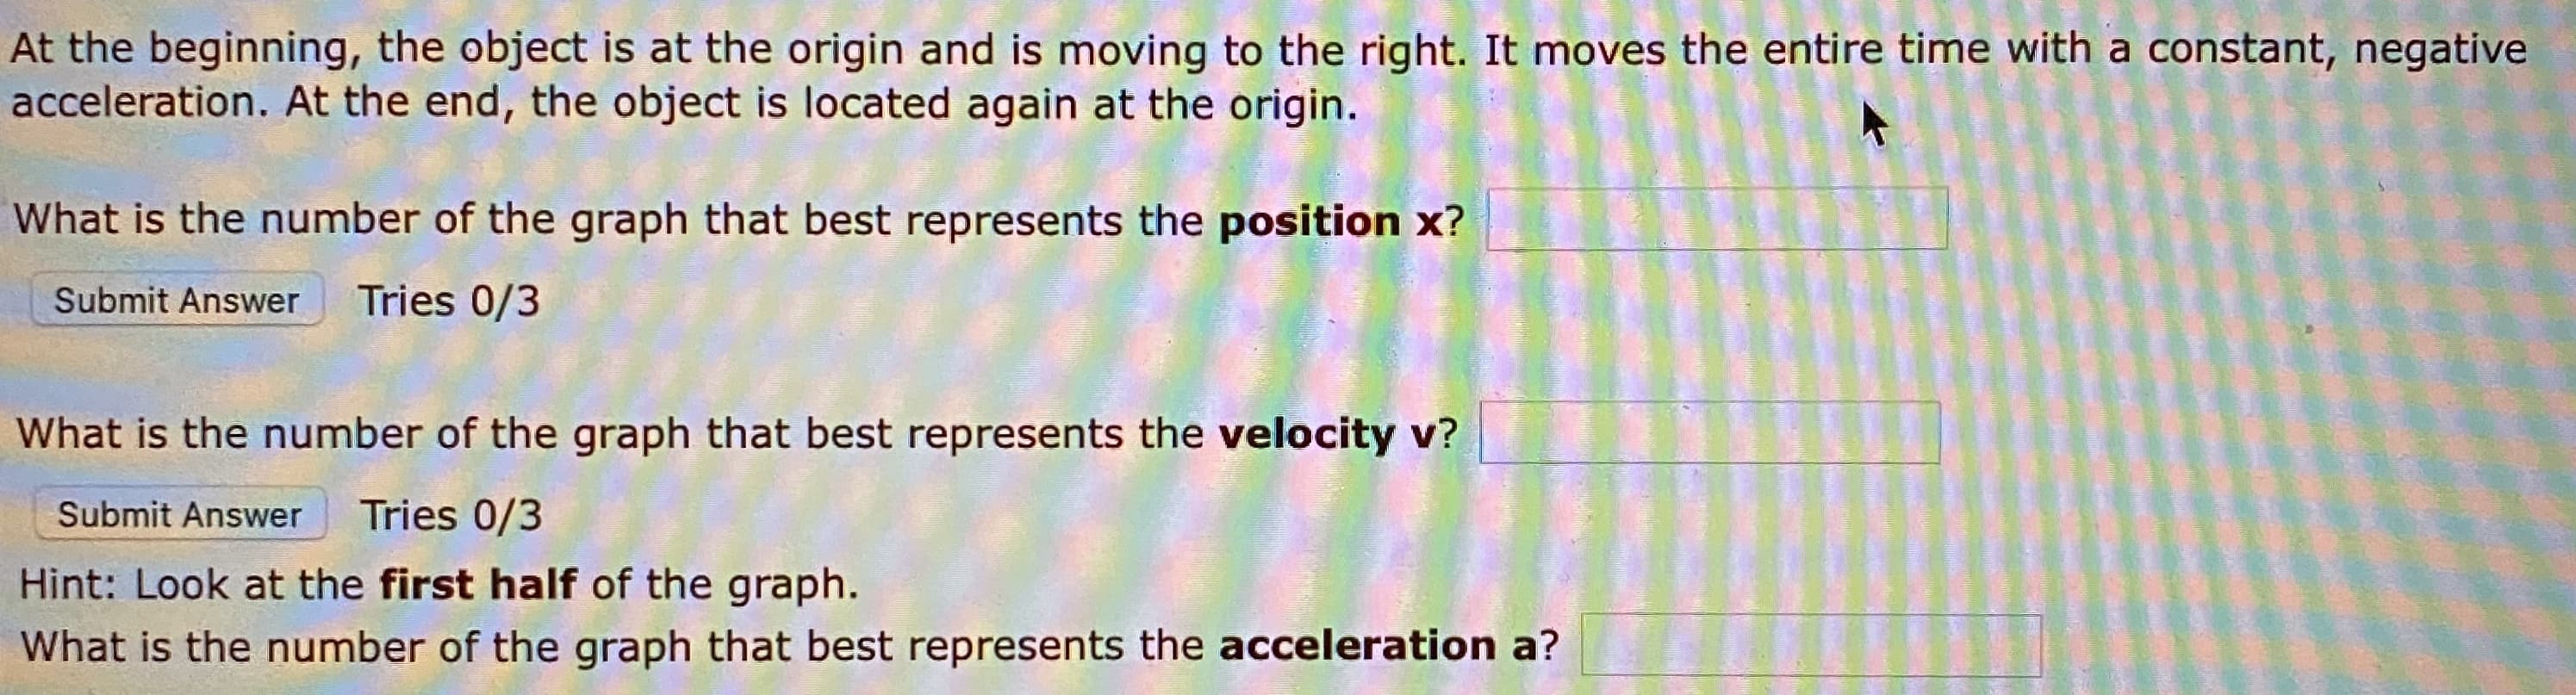 At the beginning, the object is at the origin and is moving to the right. It moves the entire time with a constant, negative
acceleration. At the end, the object is located again at the origin.
What is the number of the graph that best represents the position x?
Submit Answer
Tries 0/3
What is the number of the graph that best represents the velocity v?
Submit Answer
Tries 0/3
Hint: Look at the first half of the graph.
What is the number of the graph that best represents the acceleration a?
